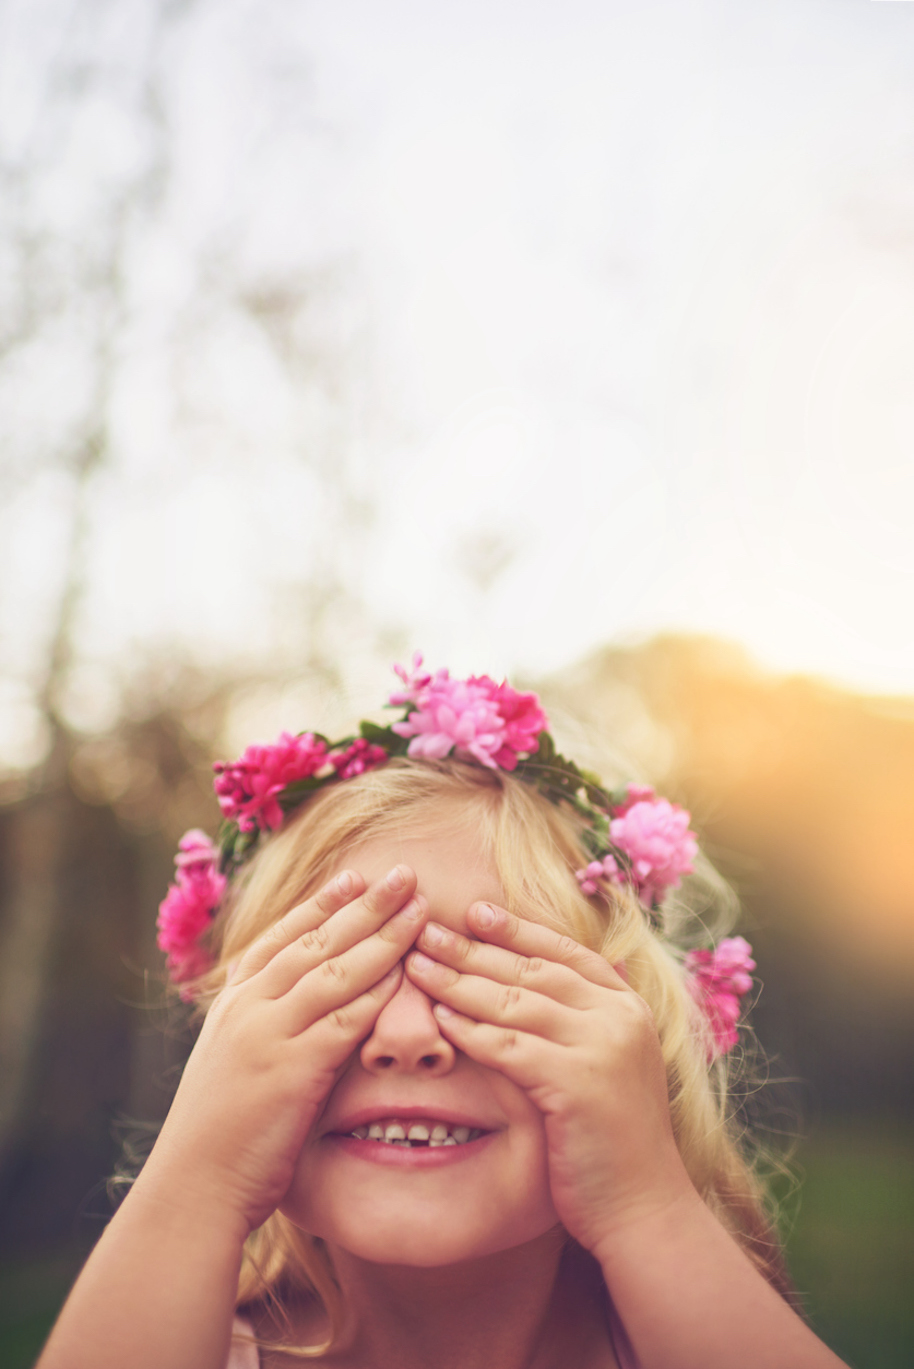 Shot of a cheerful little girl with her hands on her eyes playing hide and seek outside in nature